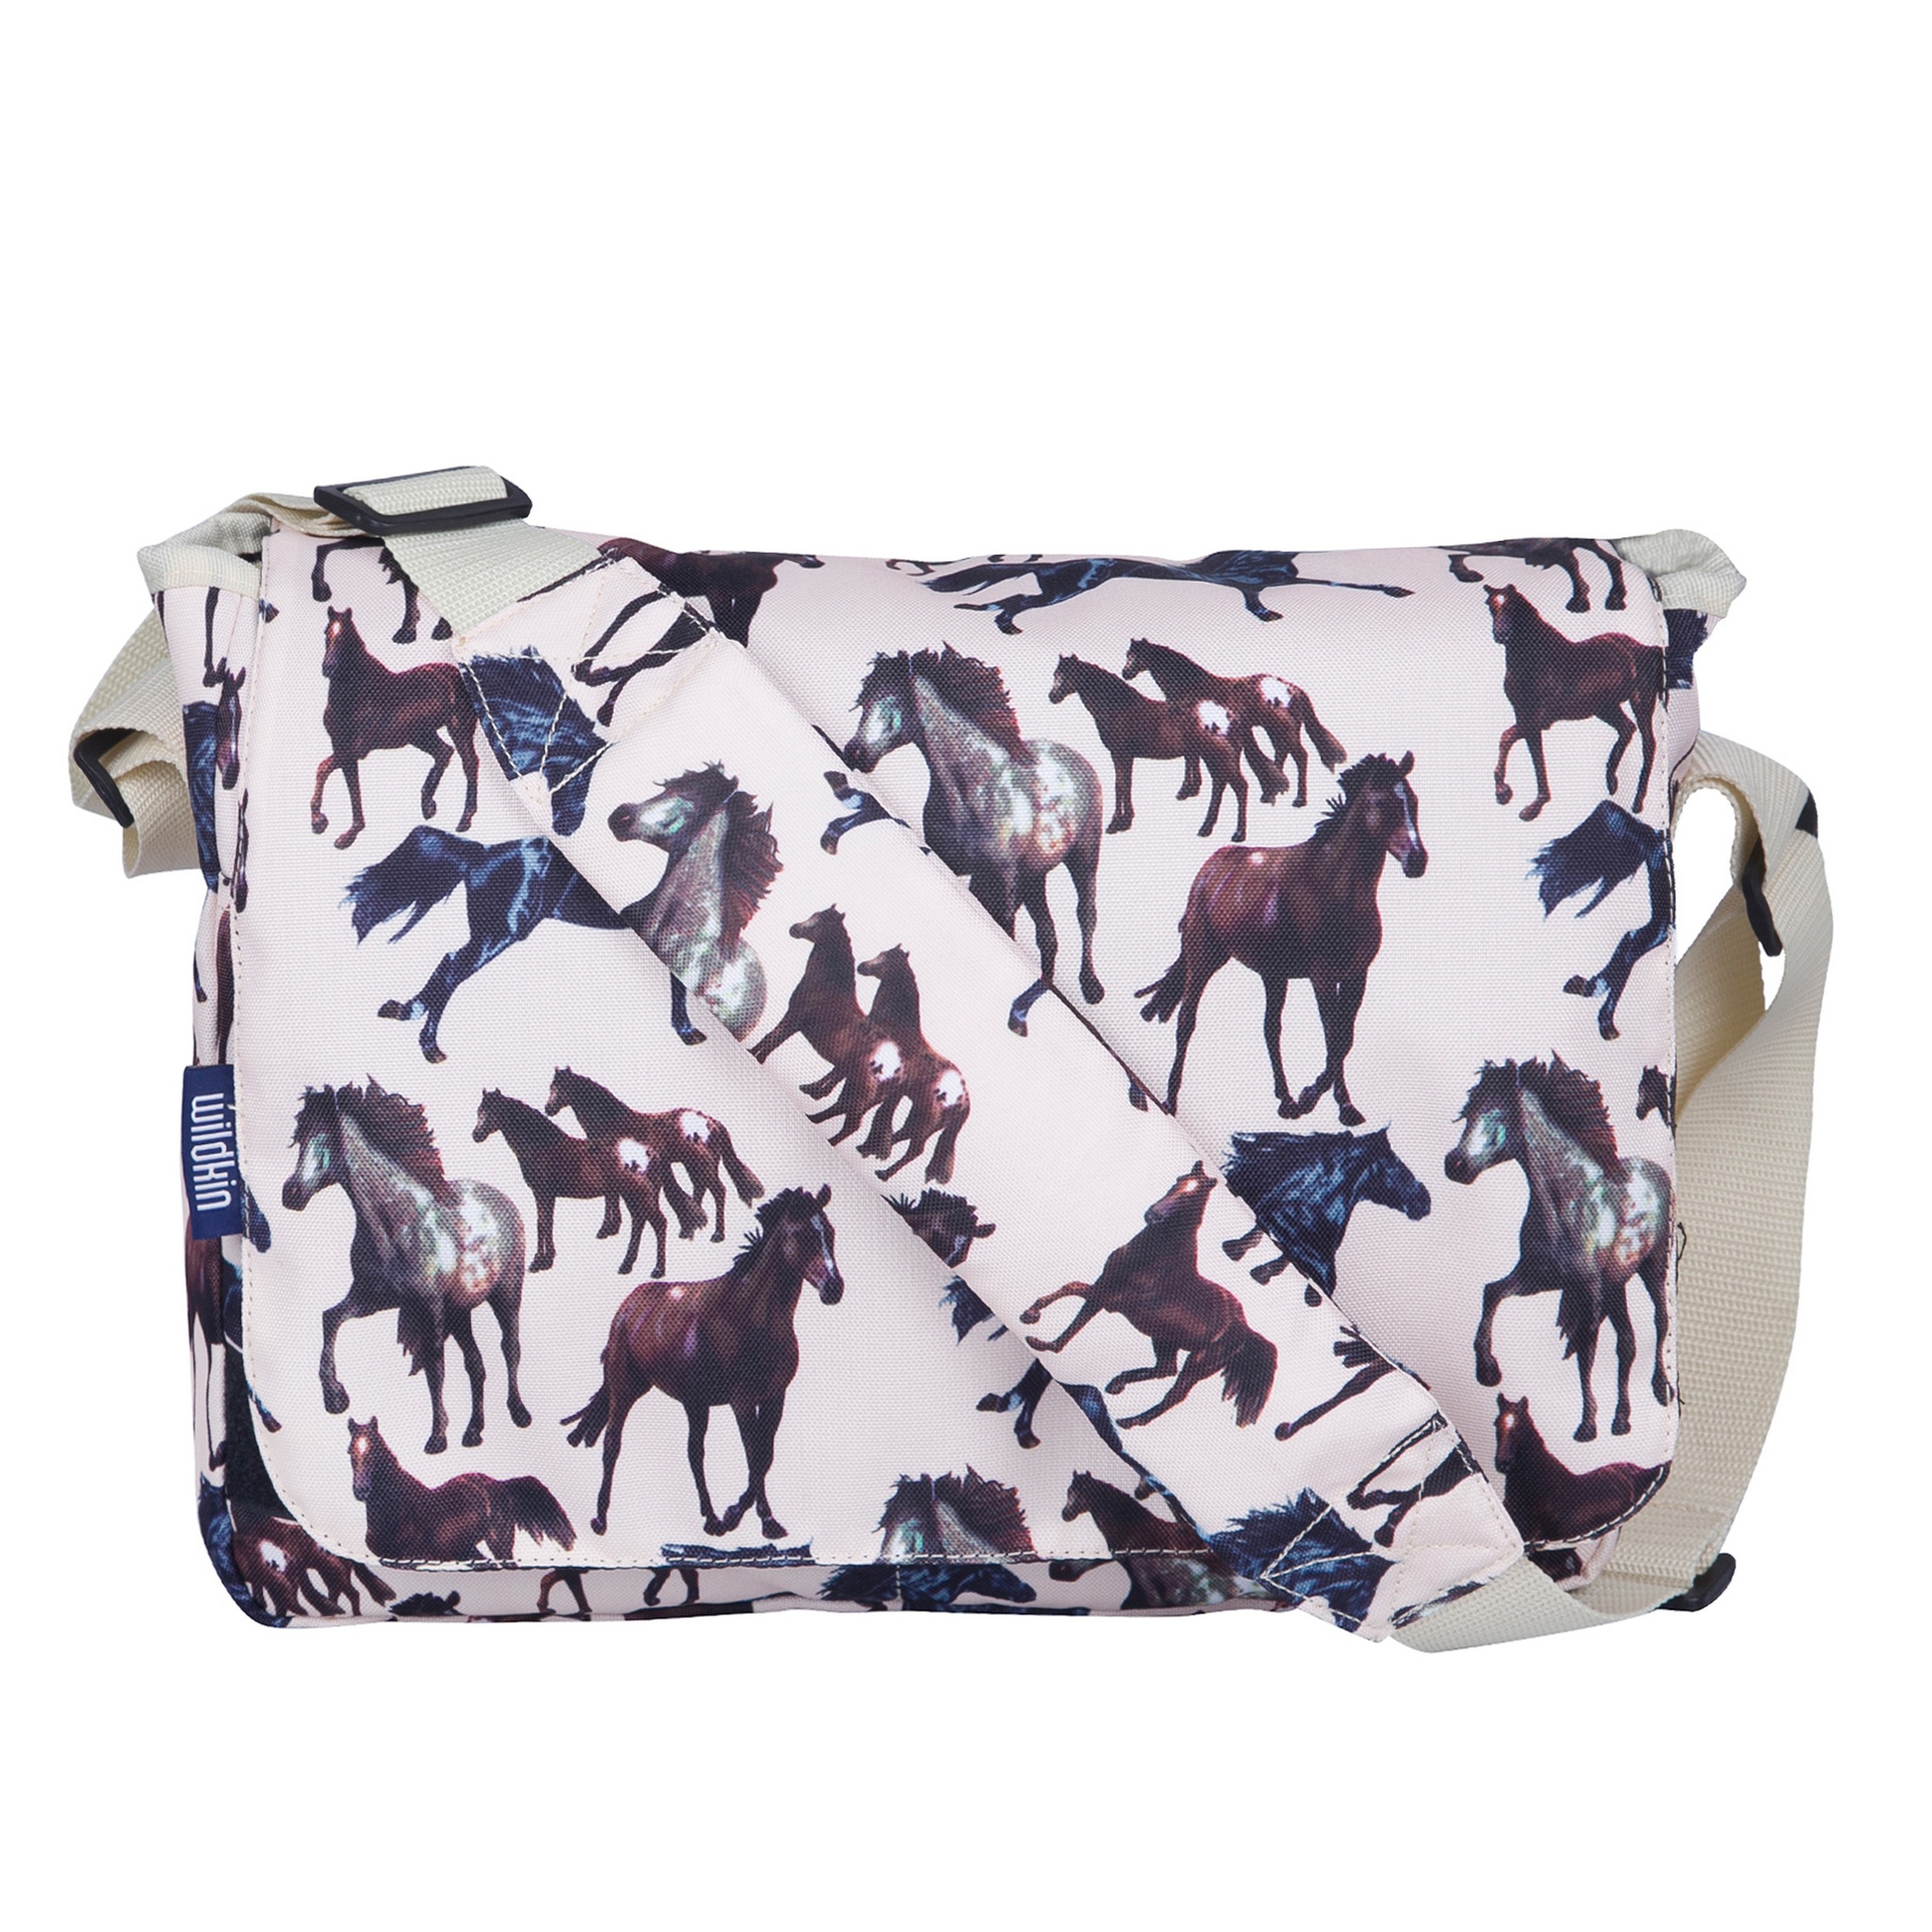 Wildkin Kids Messenger Bag for Girls, Perfect for School or Travel, 13 Inch (Horse Dreams Beige) - image 4 of 7